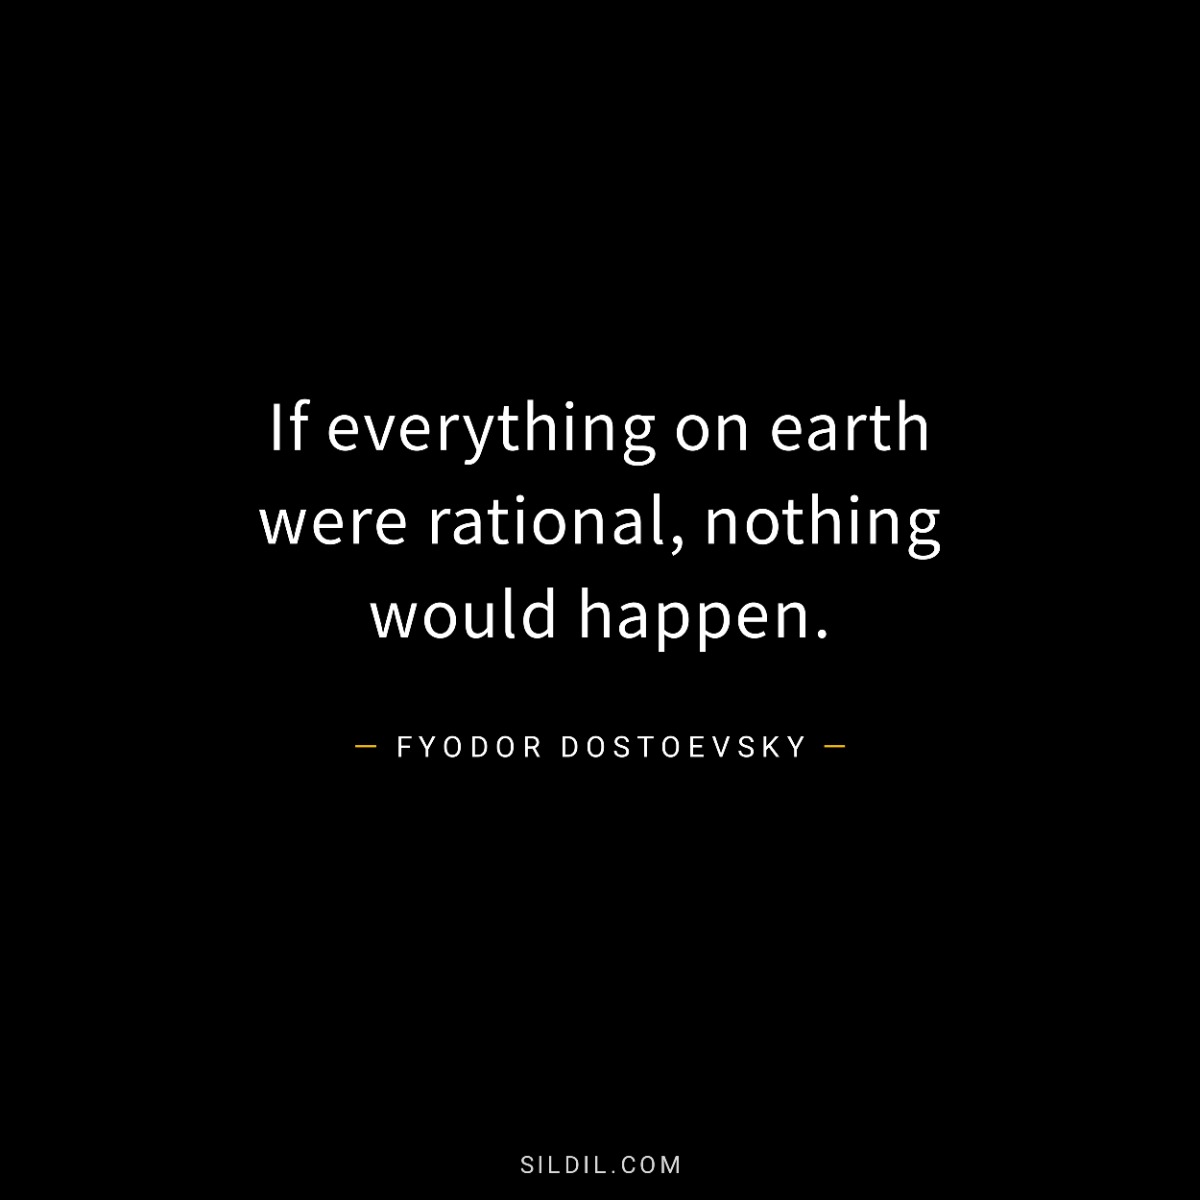 If everything on earth were rational, nothing would happen.